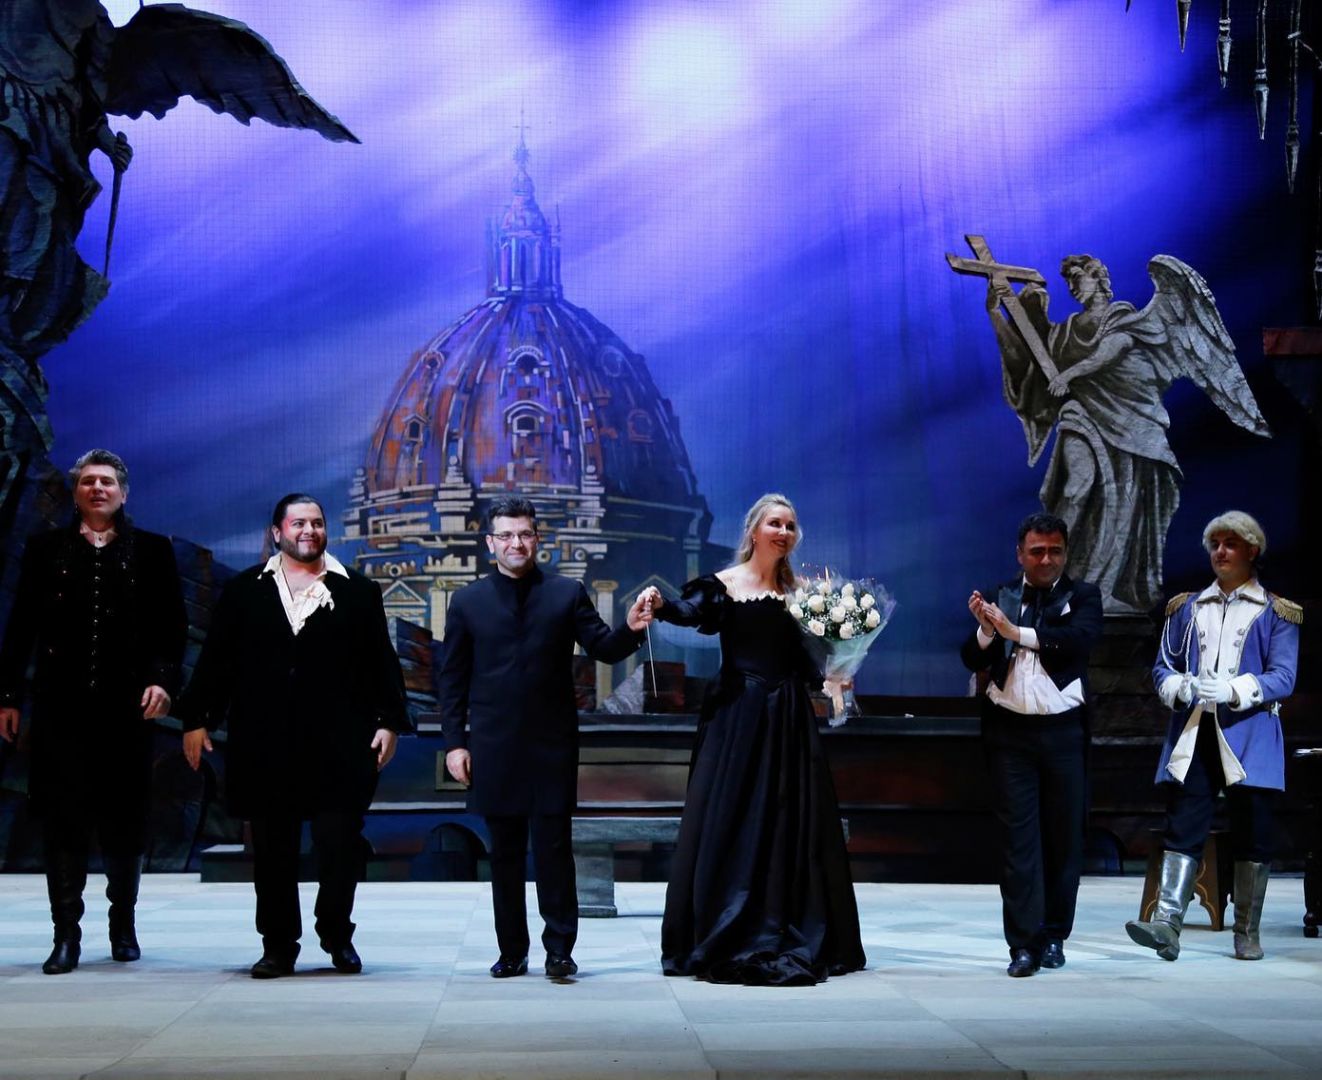 Puccini's opera astonishes fans of classical music [EXCLUSIVE]